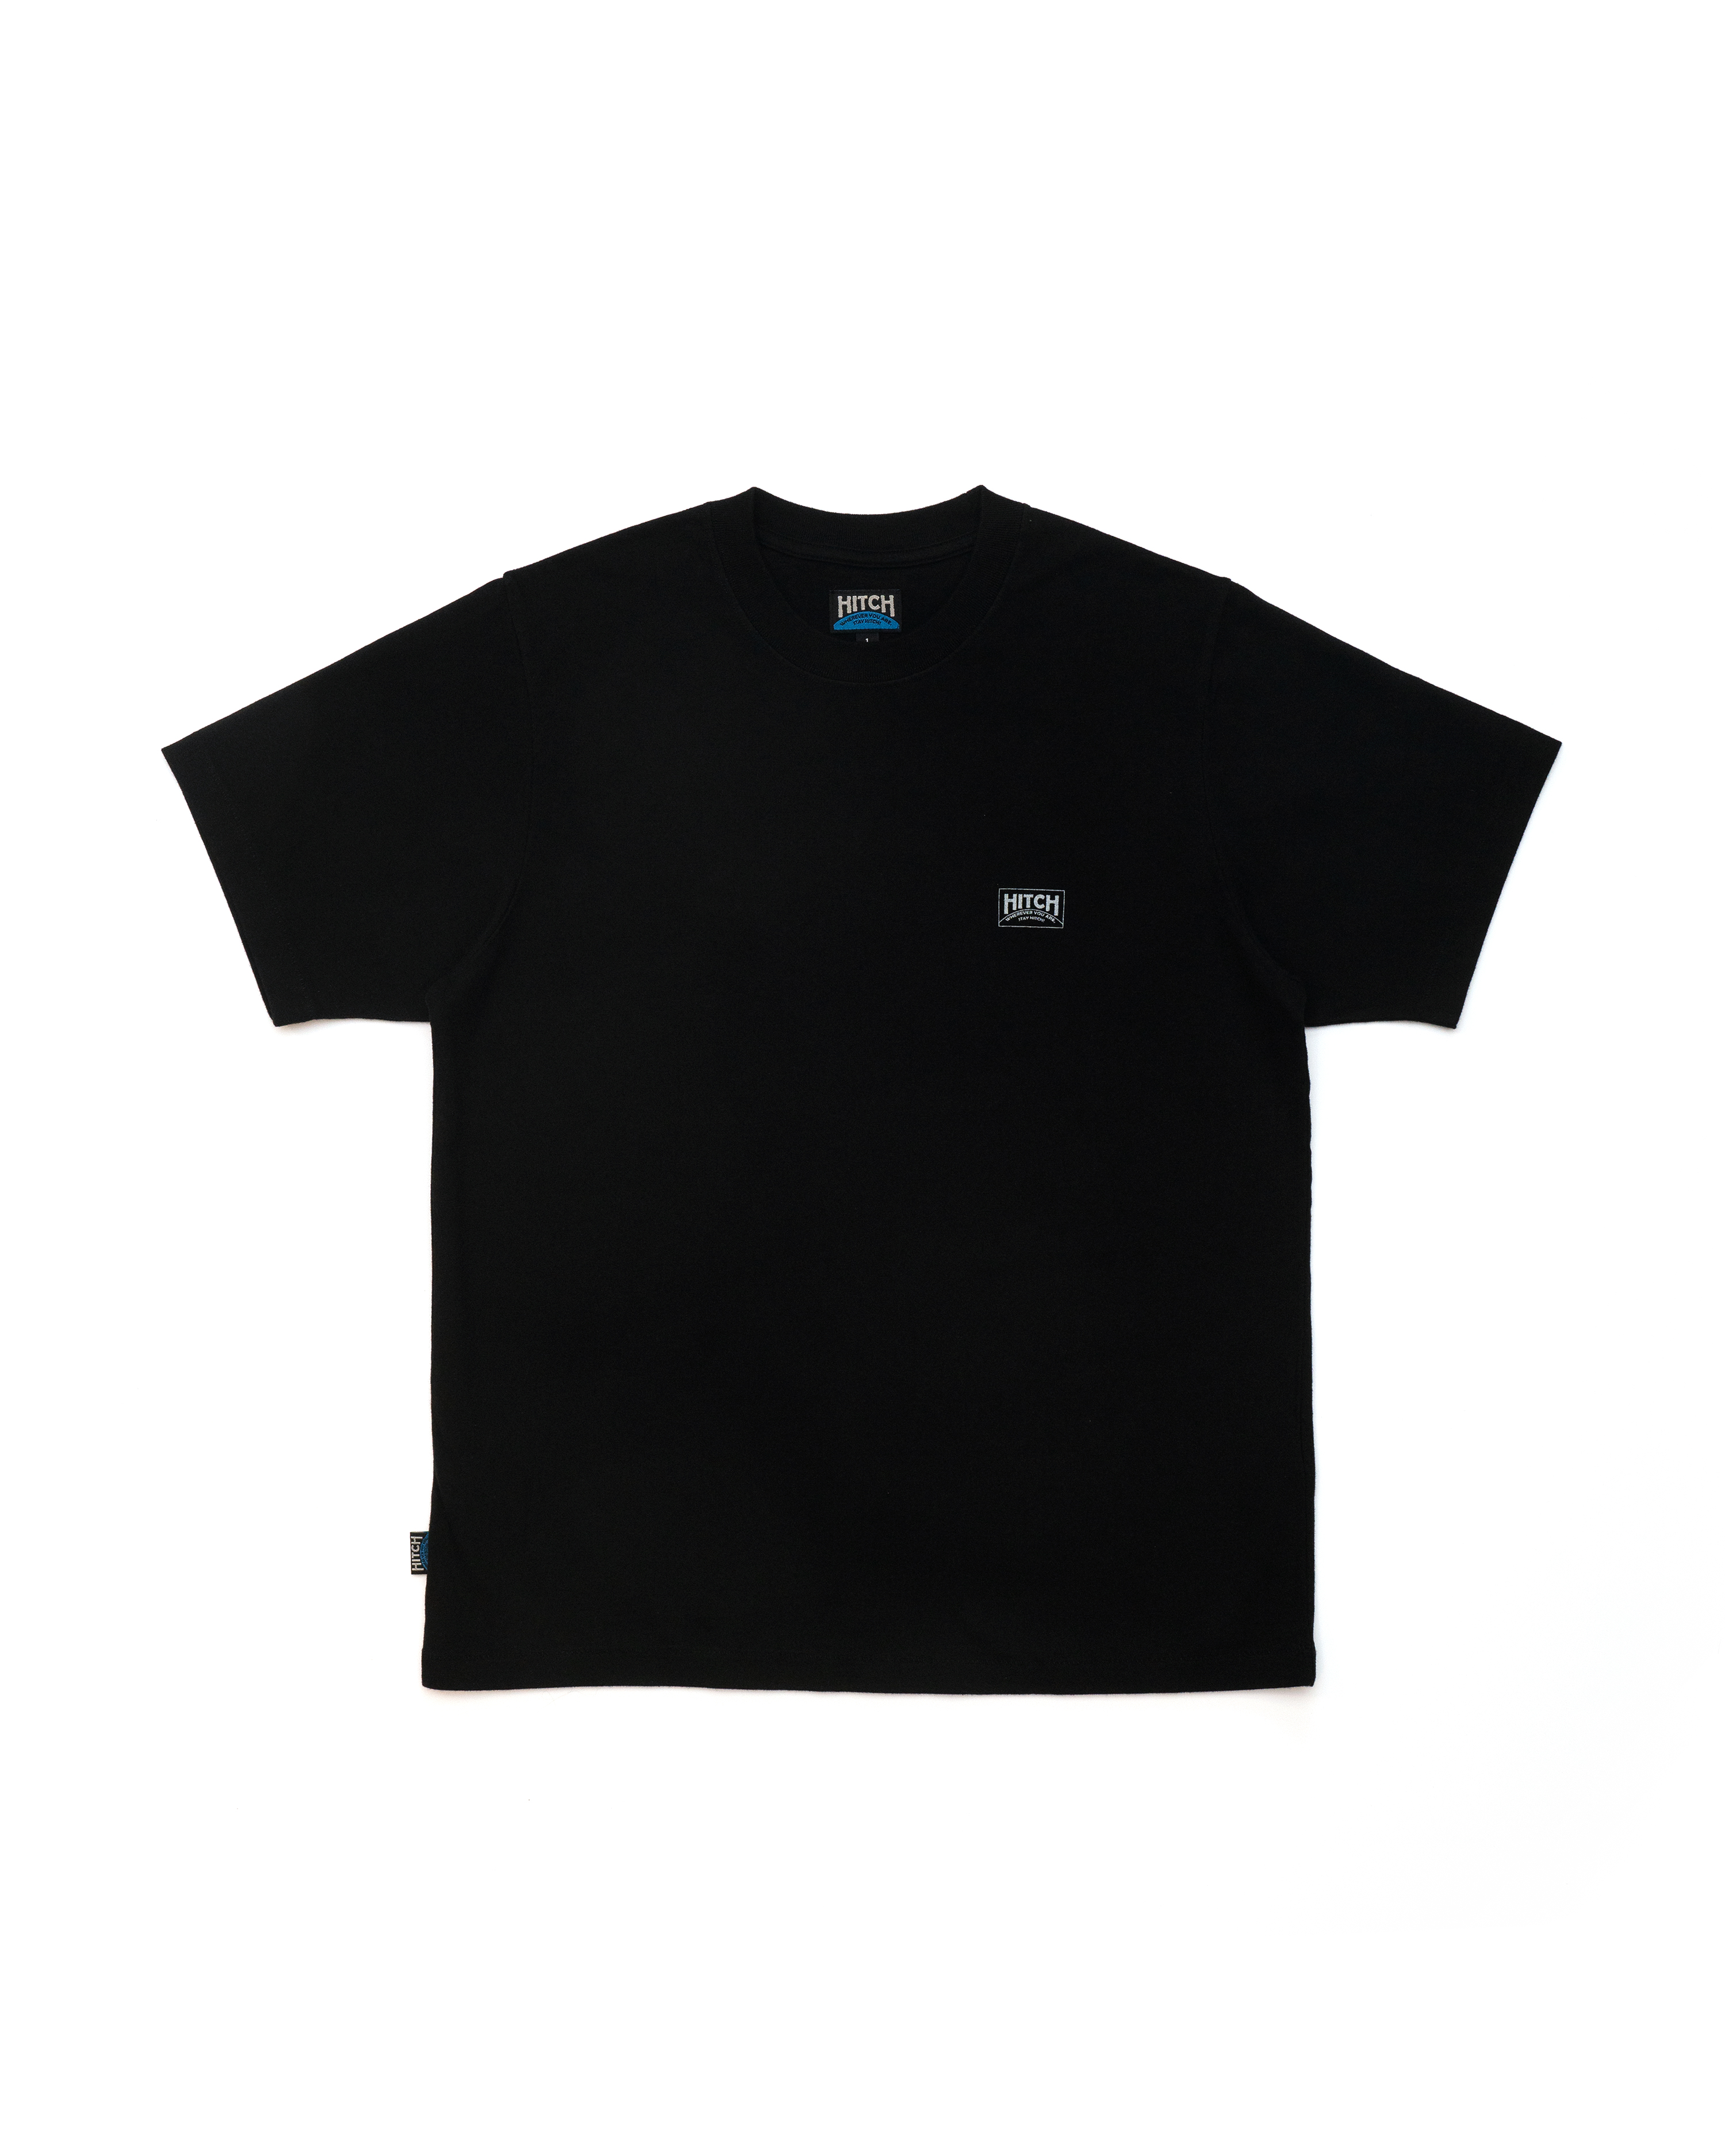 [out of stock] HBC reflector Tee - black